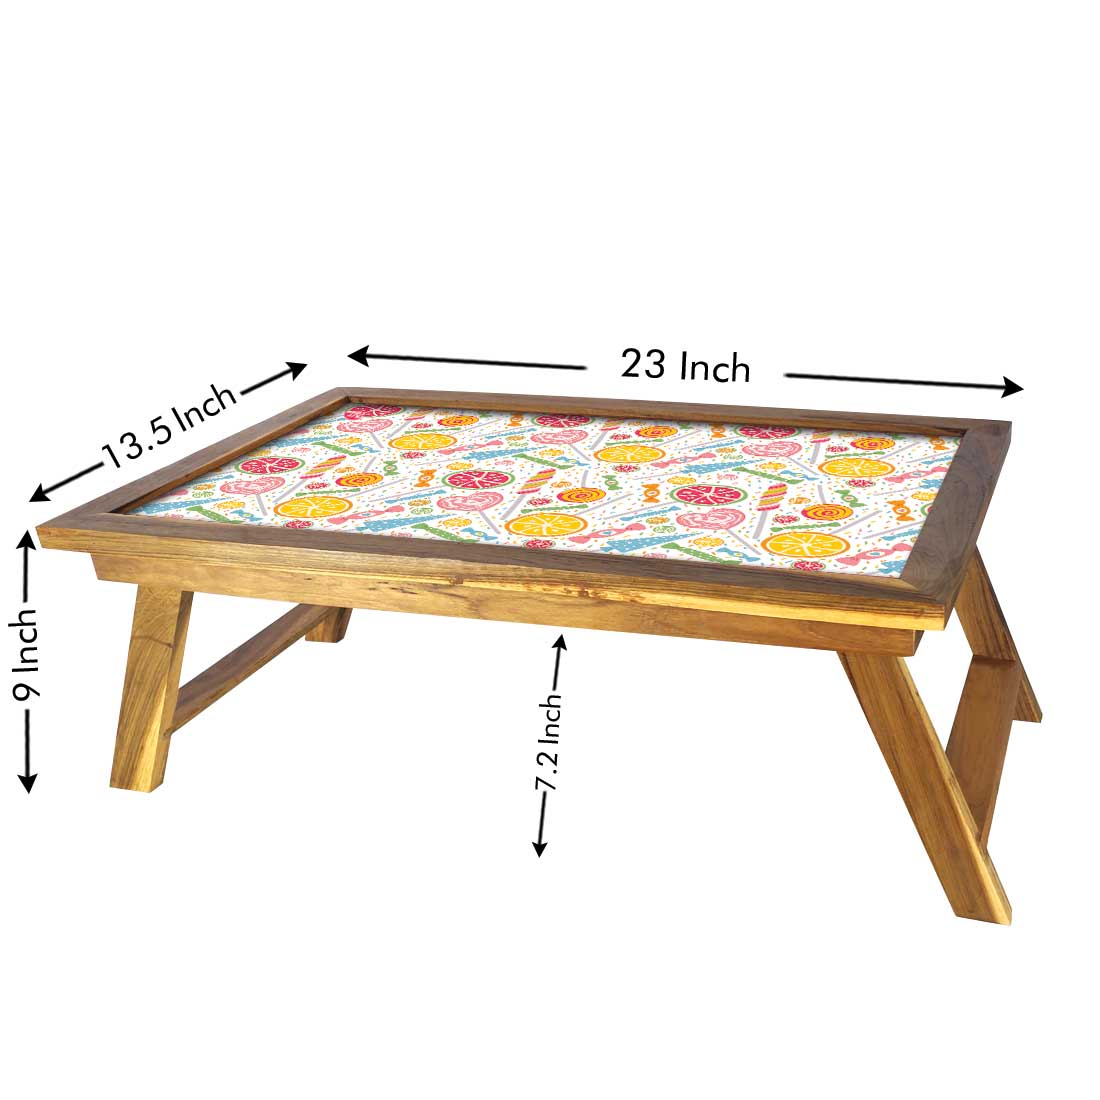 Folding Laptop Table Home Breakfast Tables Foldable Wooden Tray for Bed - Colorful Candy Nutcase